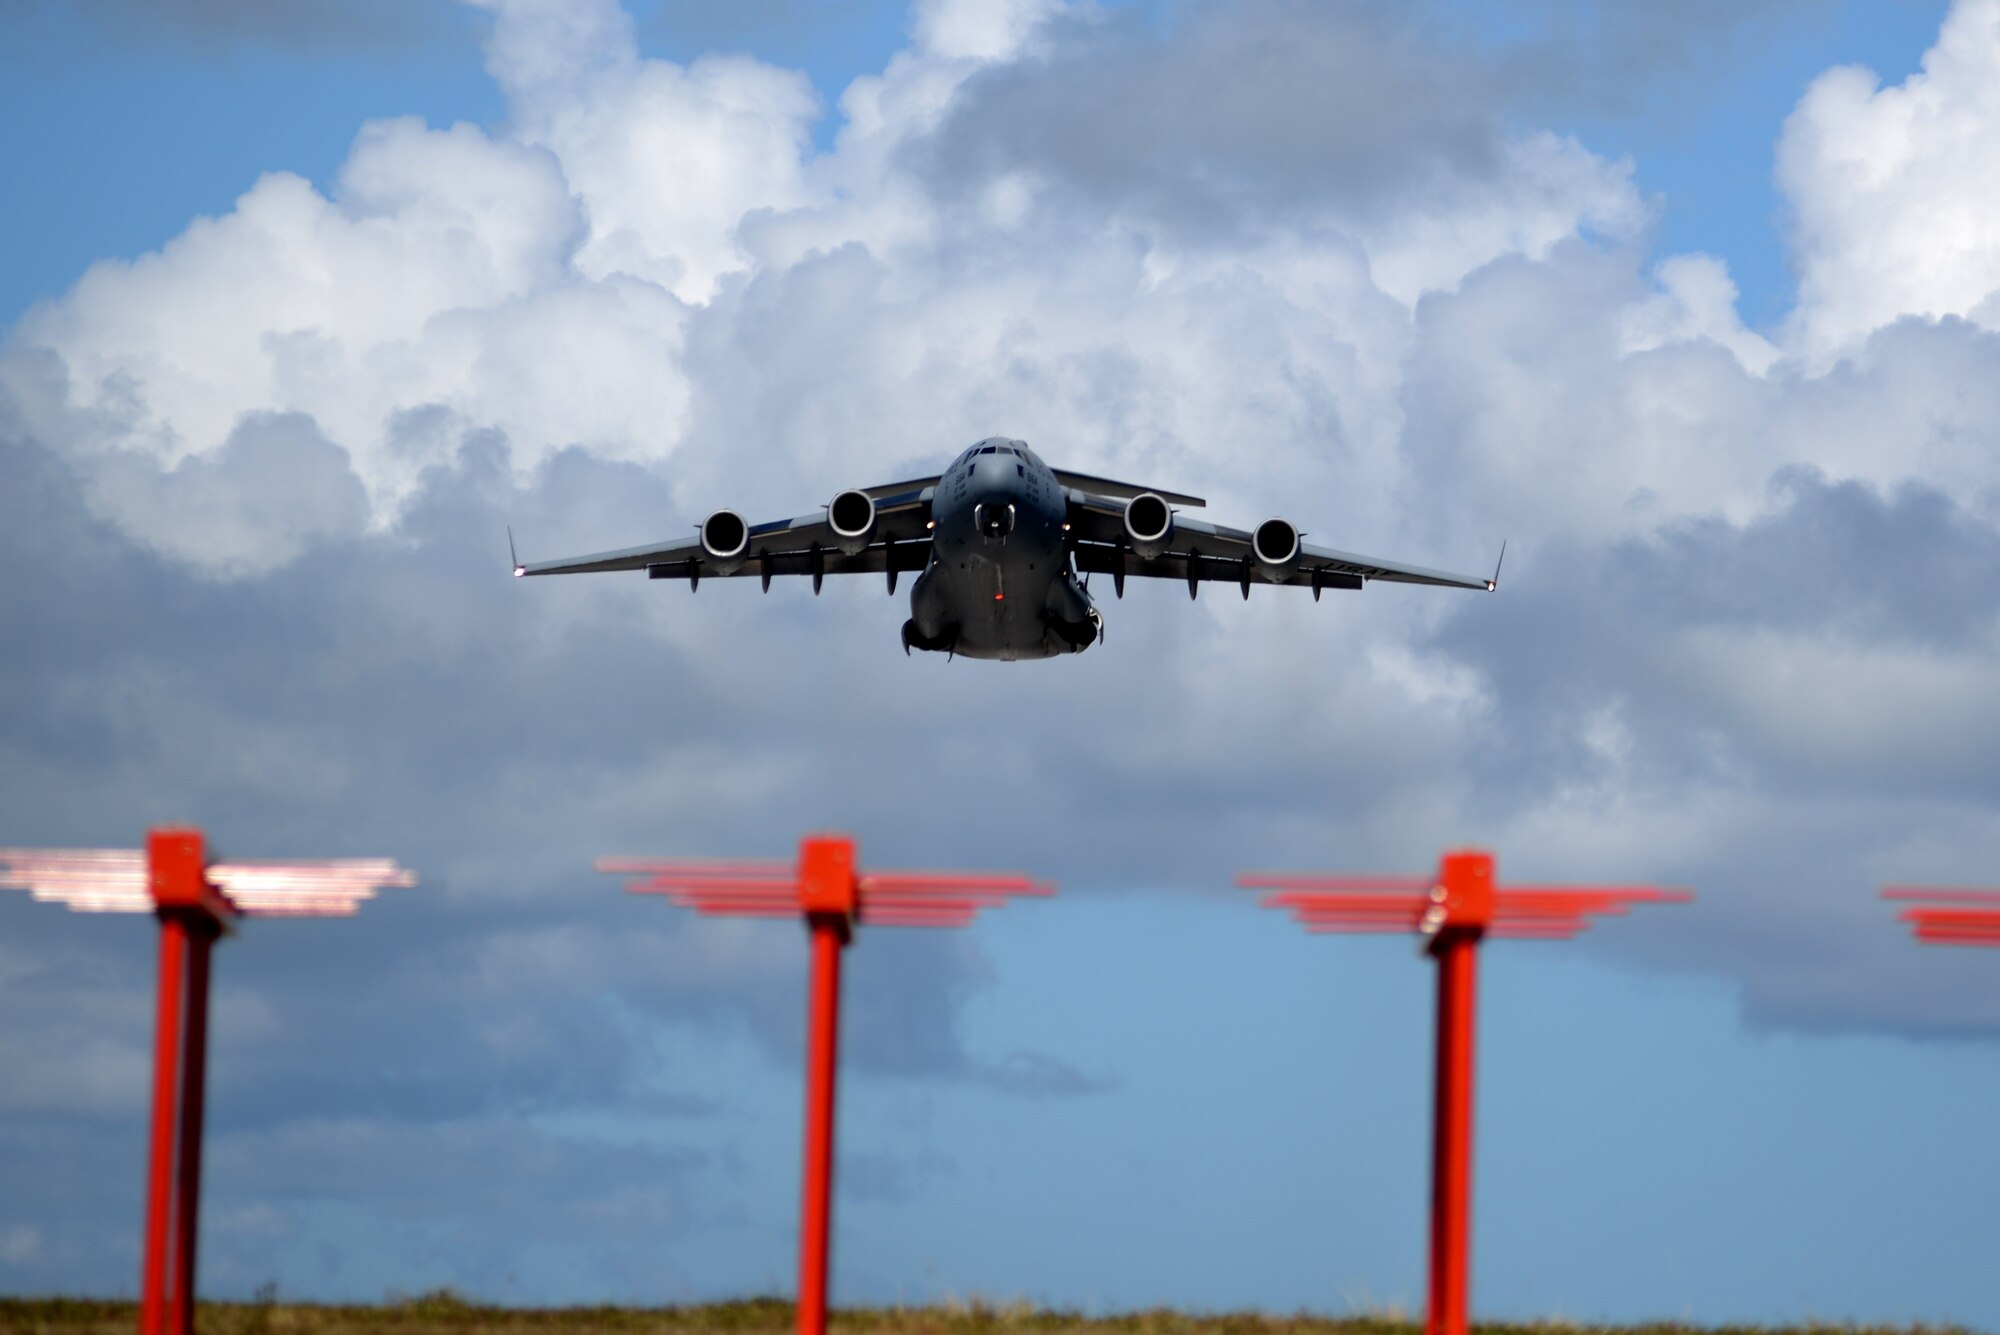 A U.S. Air Force C-17 Globemaster III aircraft assigned to Travis Air Force Base, Ca., takes off June 6, 2017, from Andersen Air Force Base, Guam. The 734th Air Mobility Squadron recently used the C-17s for a readiness exercise testing fall rescue procedures. (U.S. Air Force photo by Airman 1st Class Gerald R. Willis)